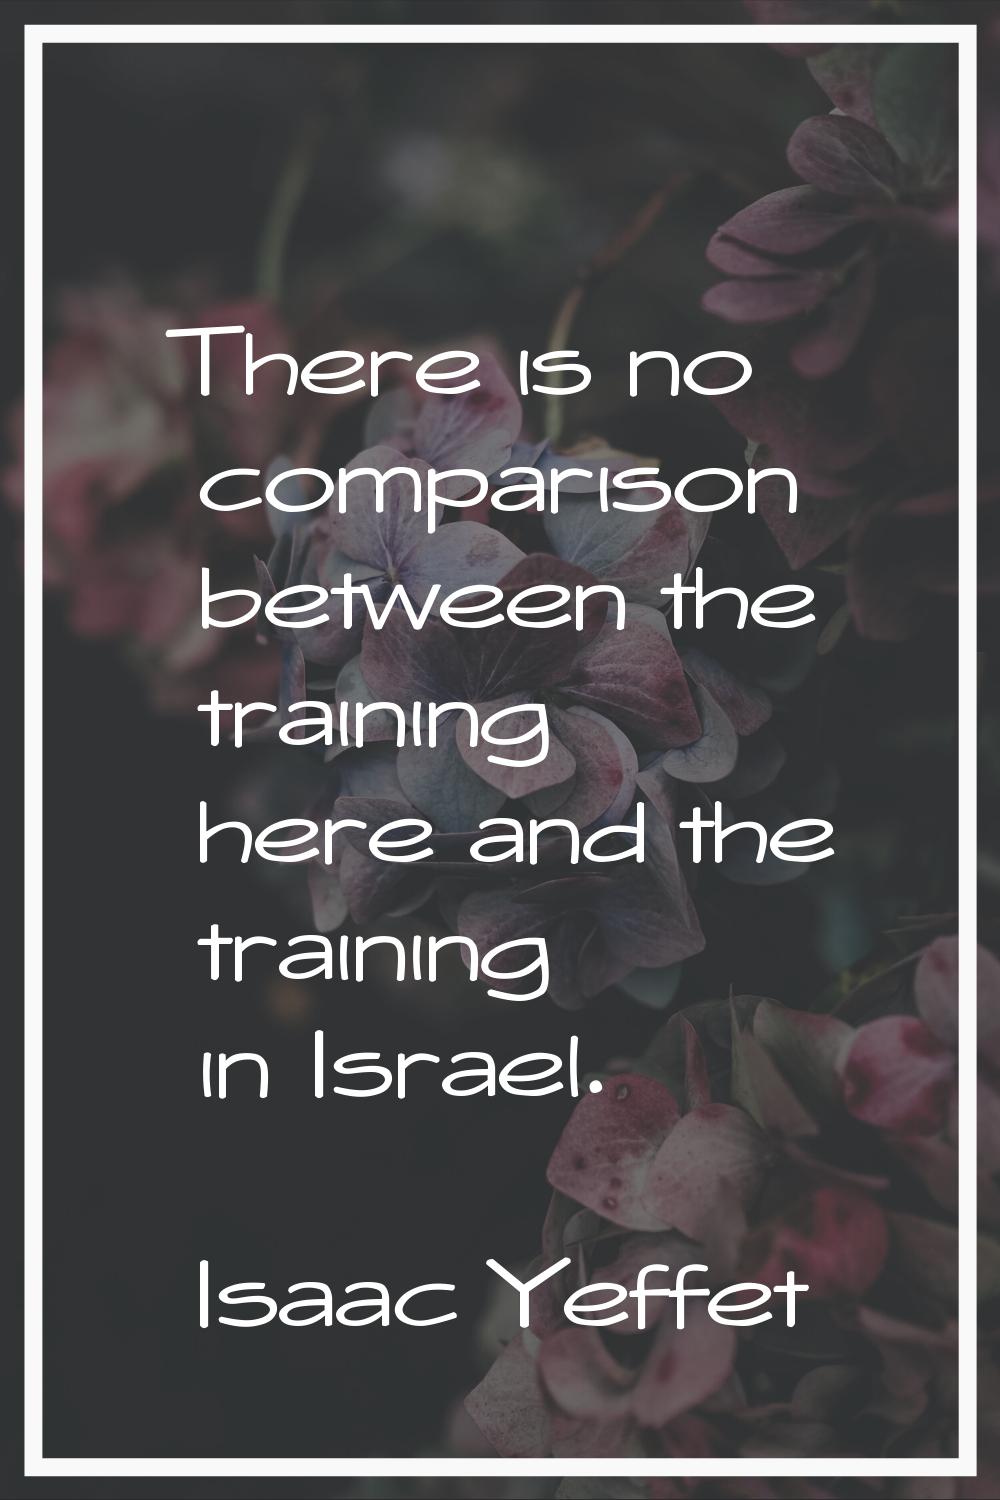 There is no comparison between the training here and the training in Israel.